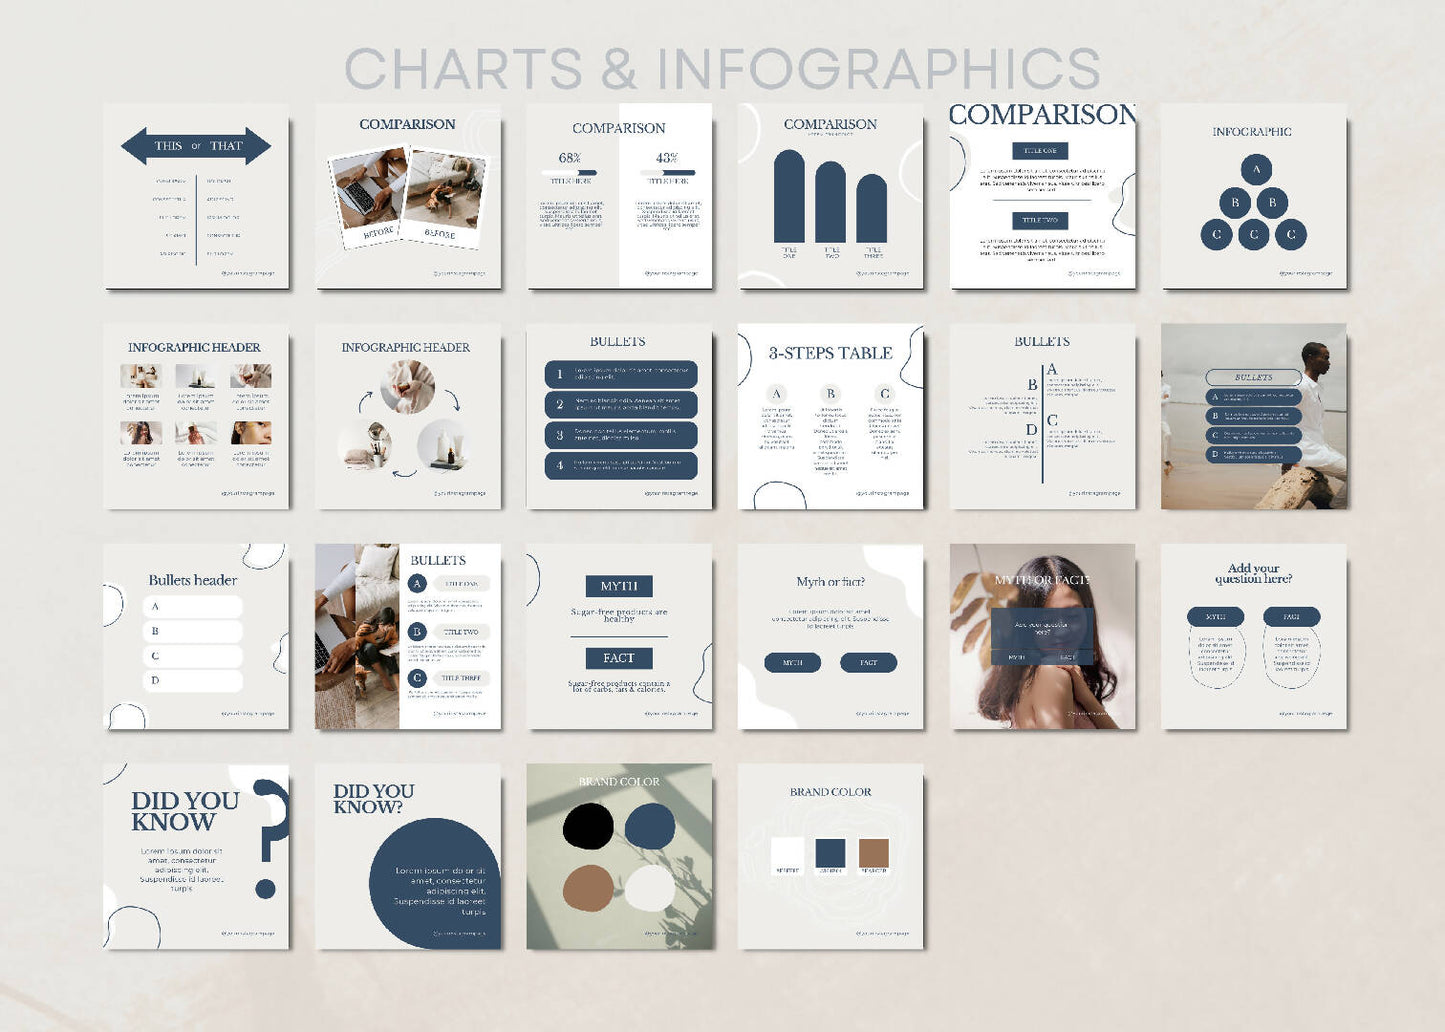 95 Instagram Multipurpose Canva Template Bundle For Charts & Infographics. Best for Coaching, Fashion and Wellness.